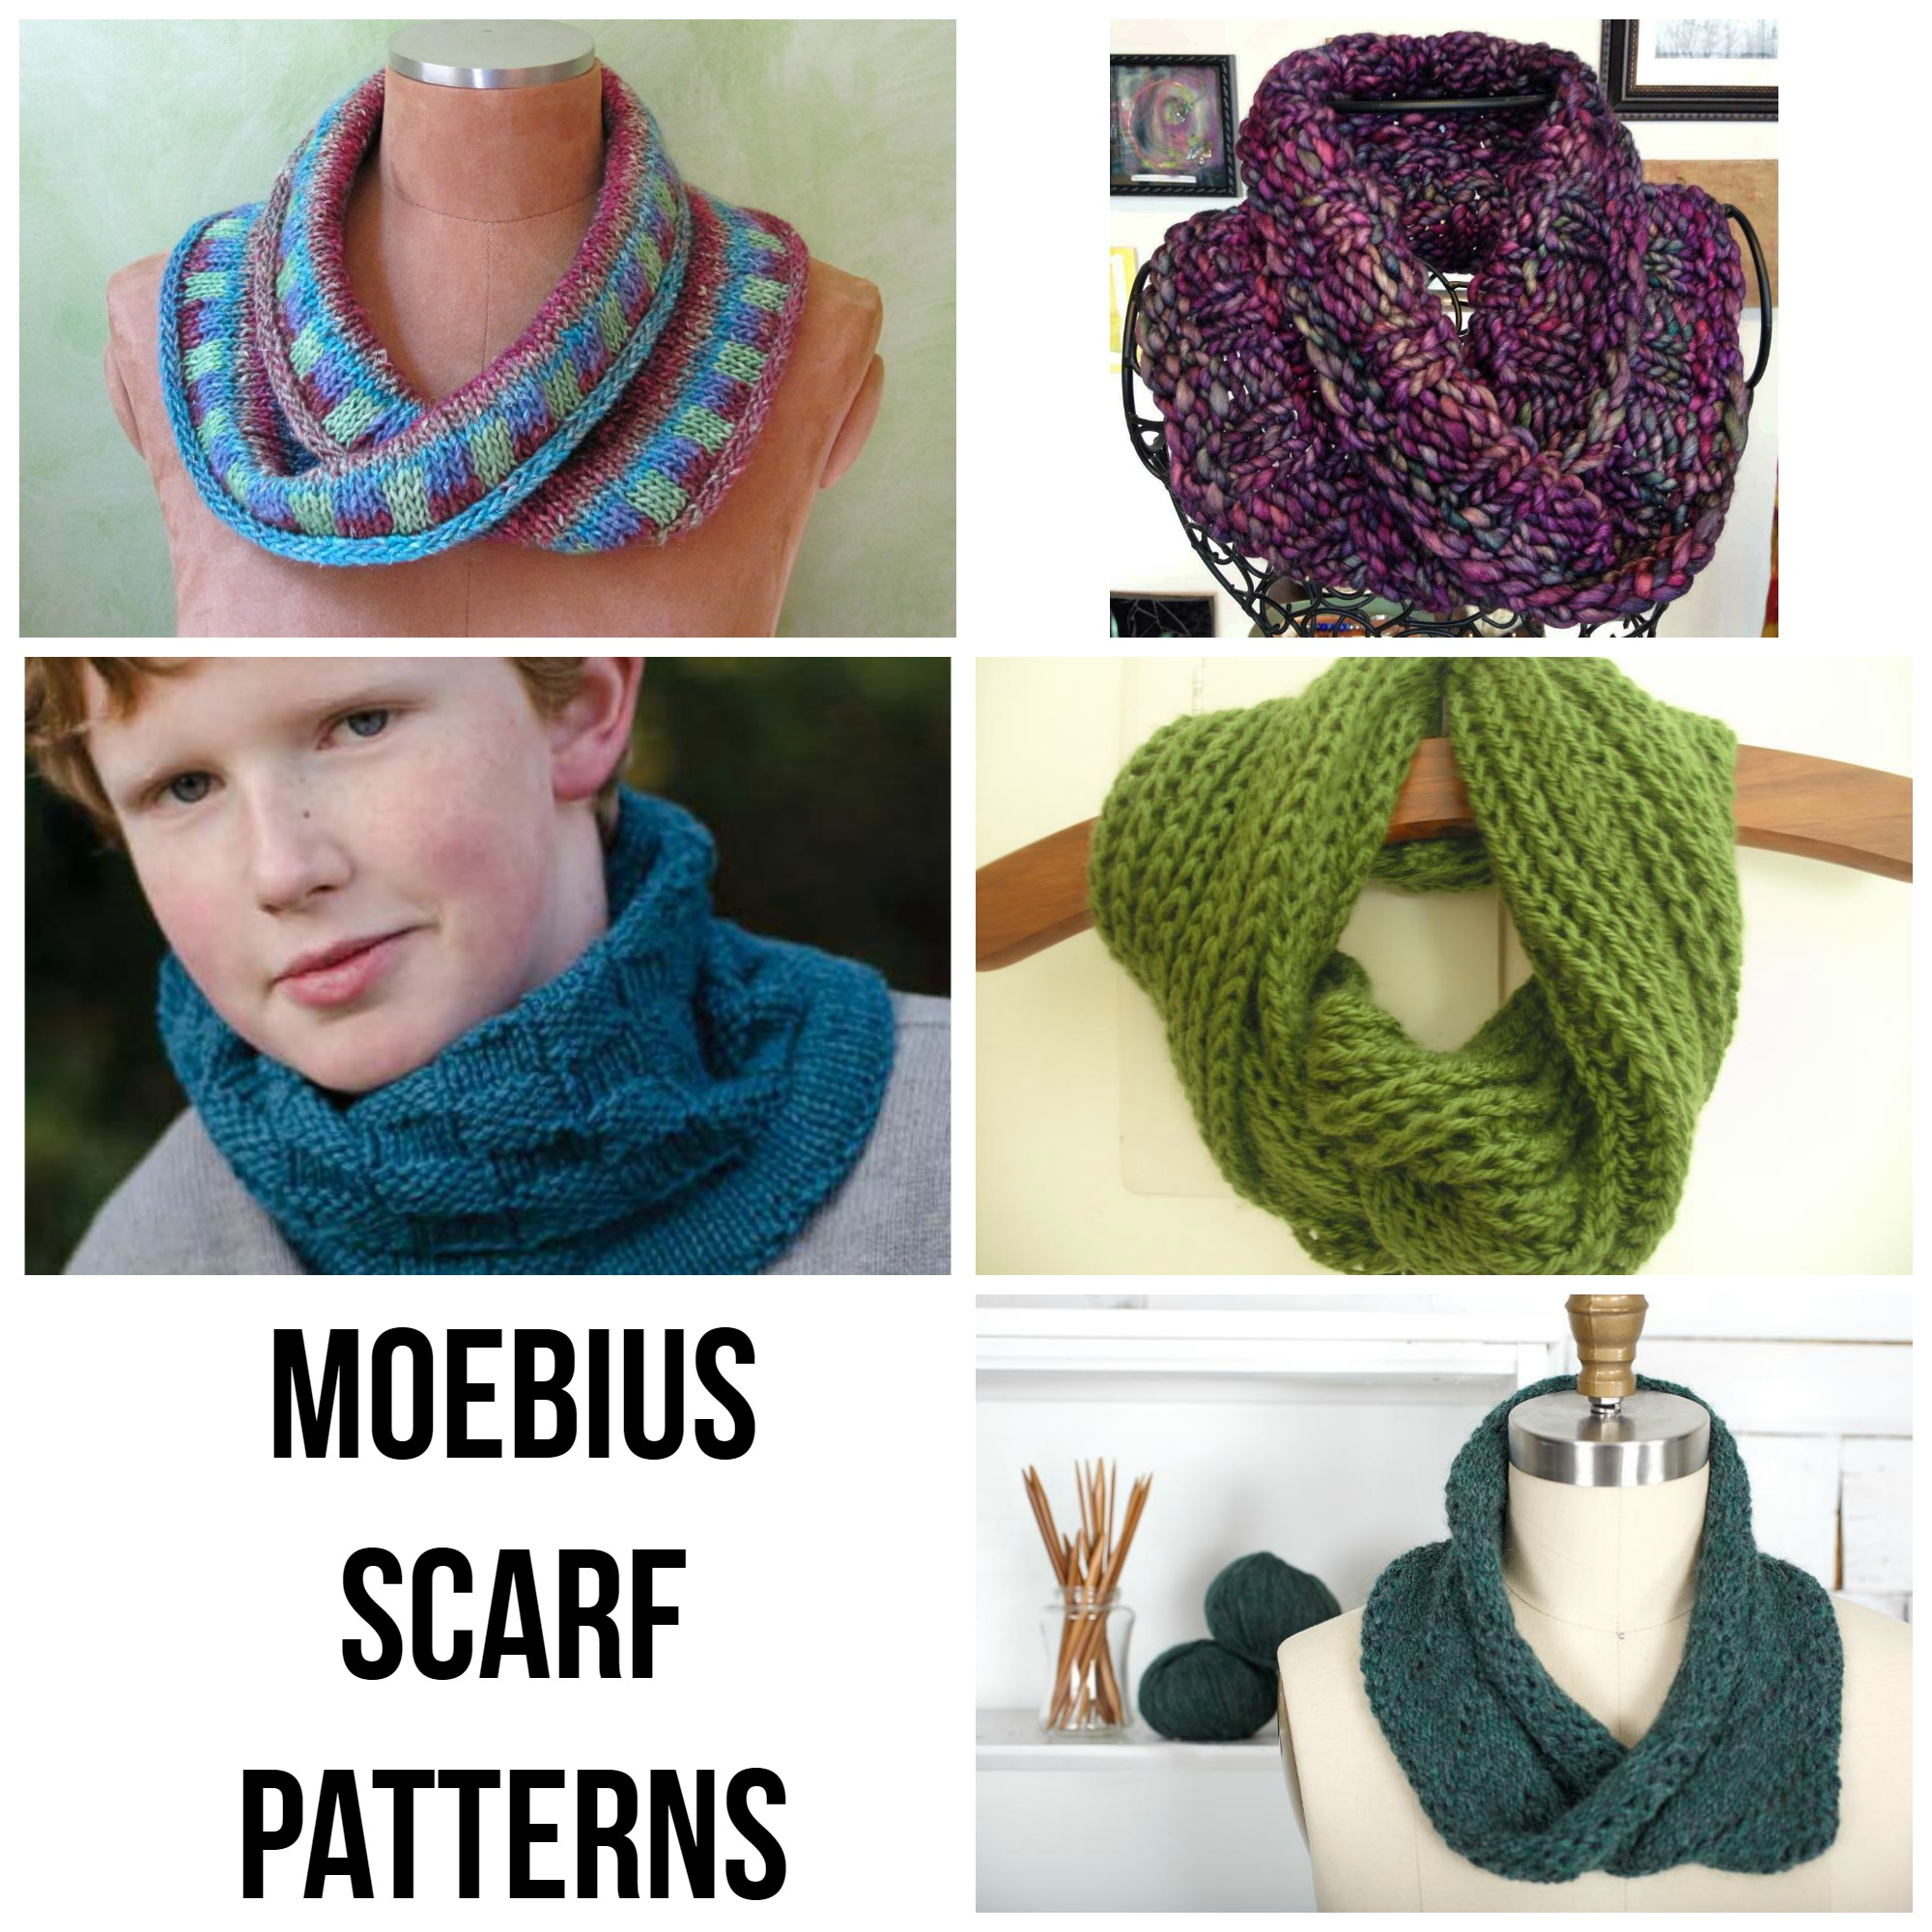 Cowl Knitted Scarf Patterns 10 Moebius Scarf Pattern Picks On Craftsy